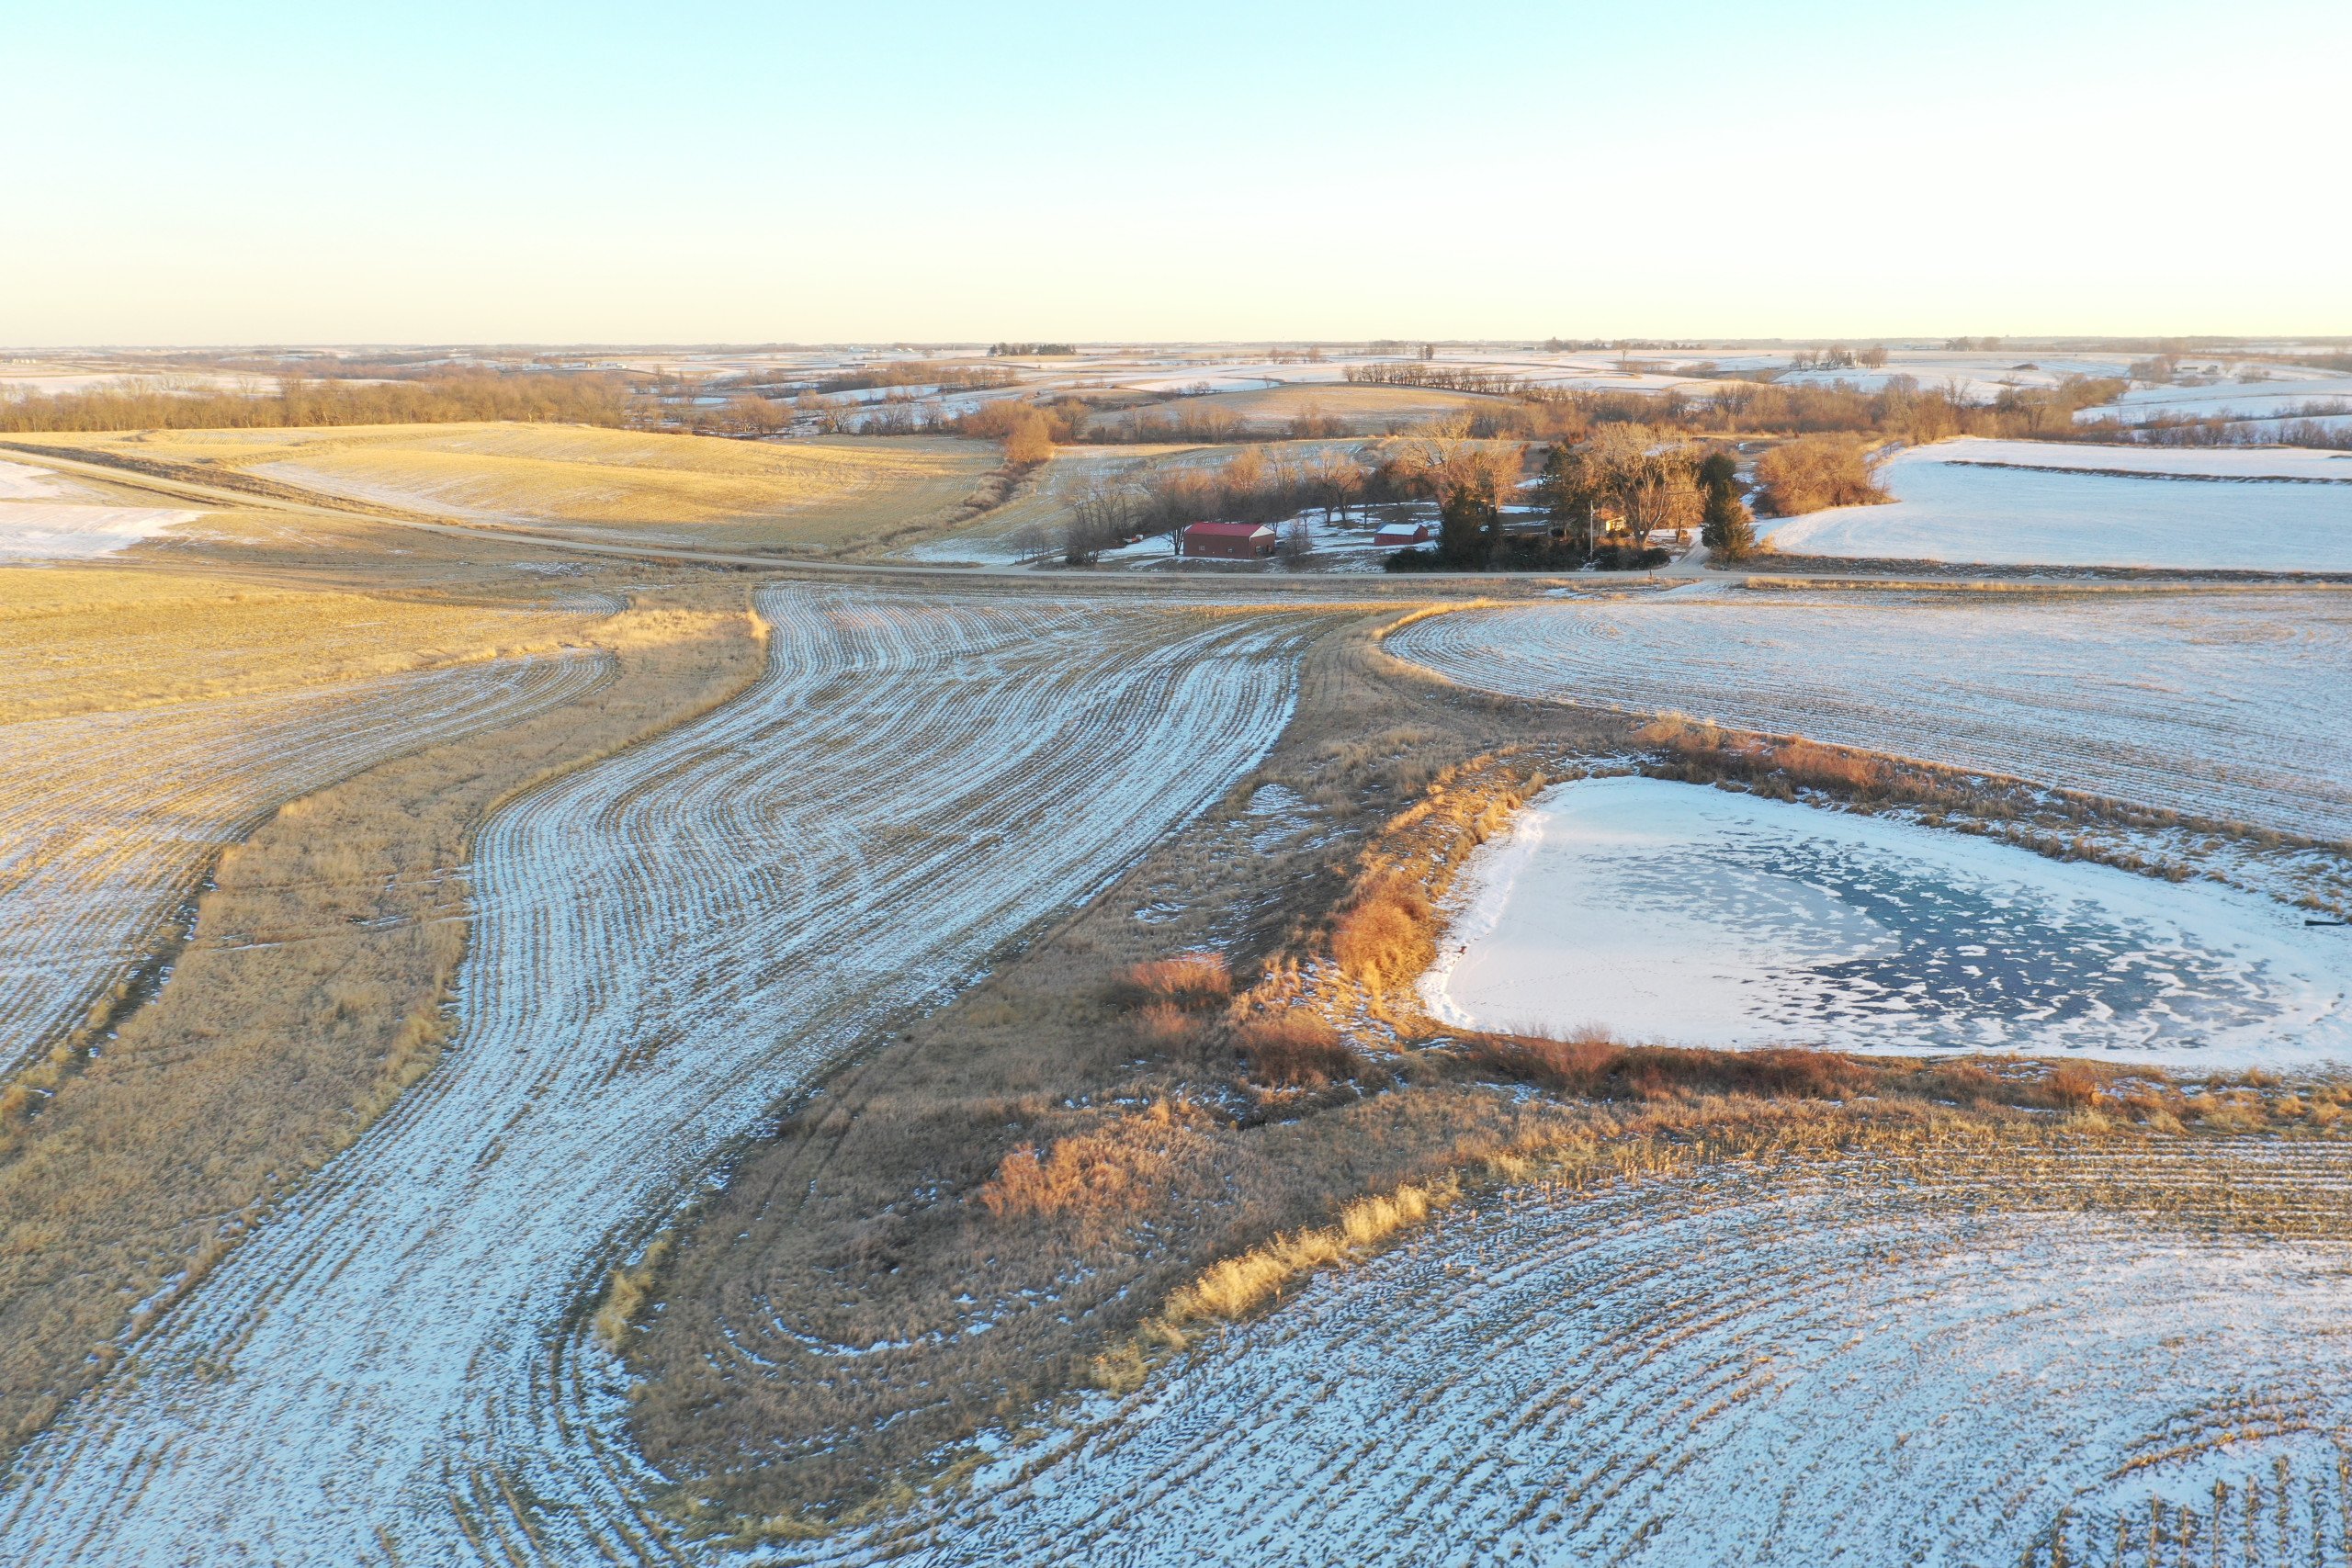 auctions-land-marion-county-iowa-75-acres-listing-number-16639-DJI_0022-0.jpg